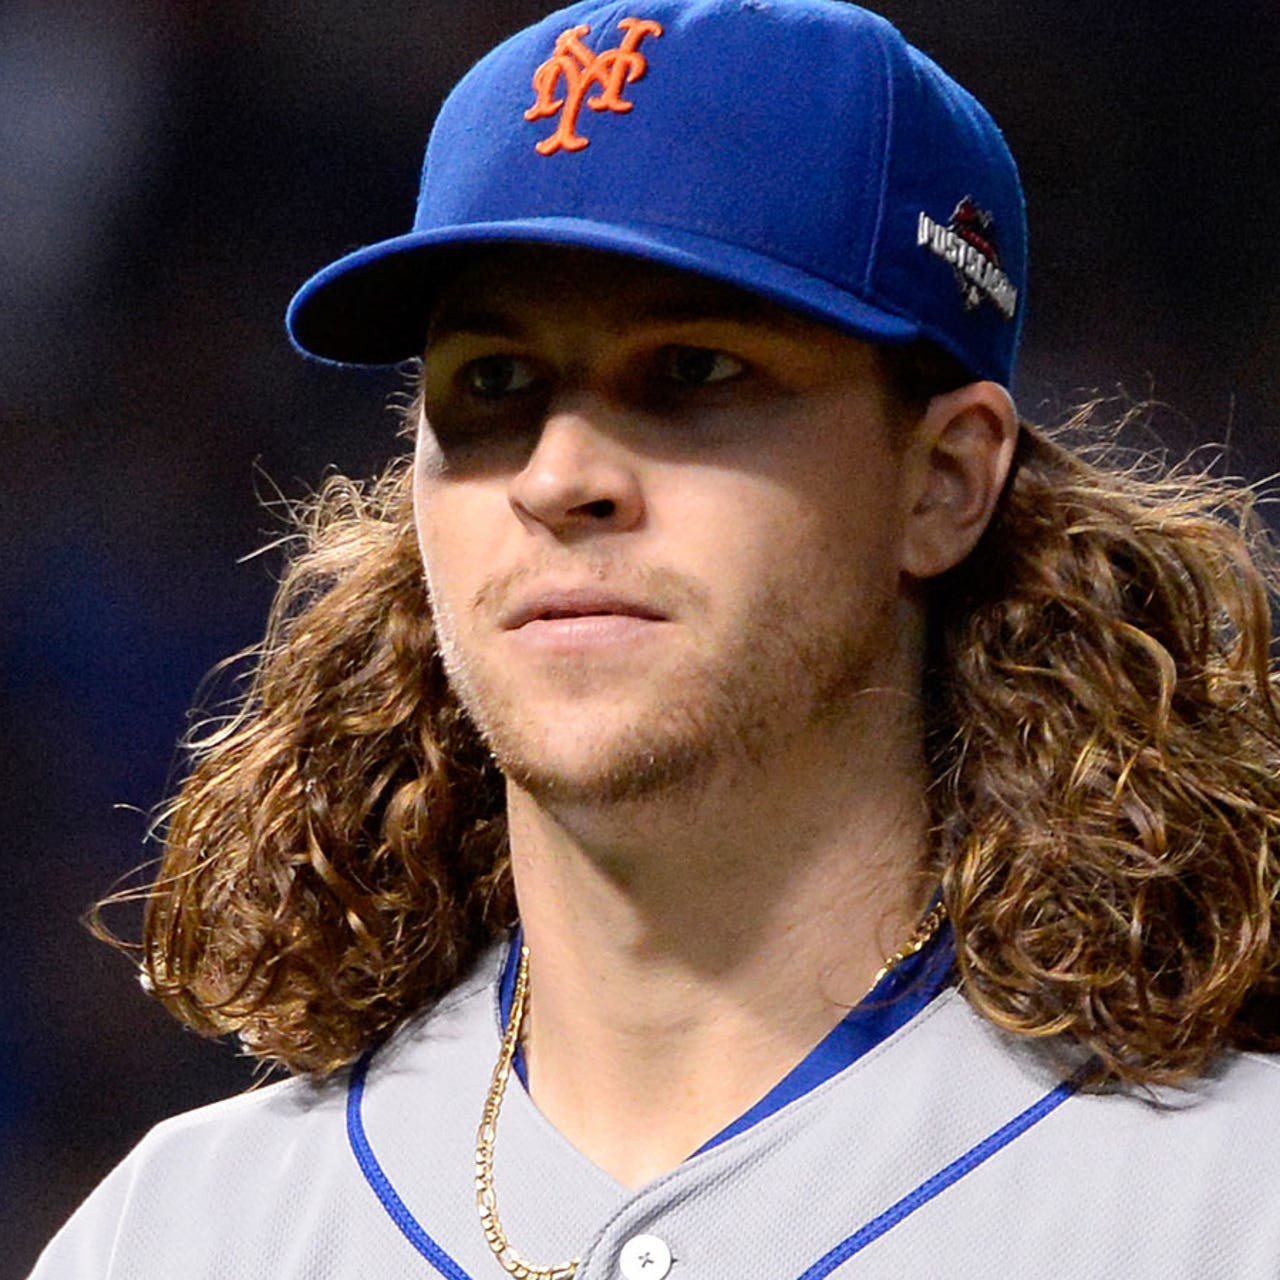 So long, locks: Mets' deGrom plans to cut hair after World Series